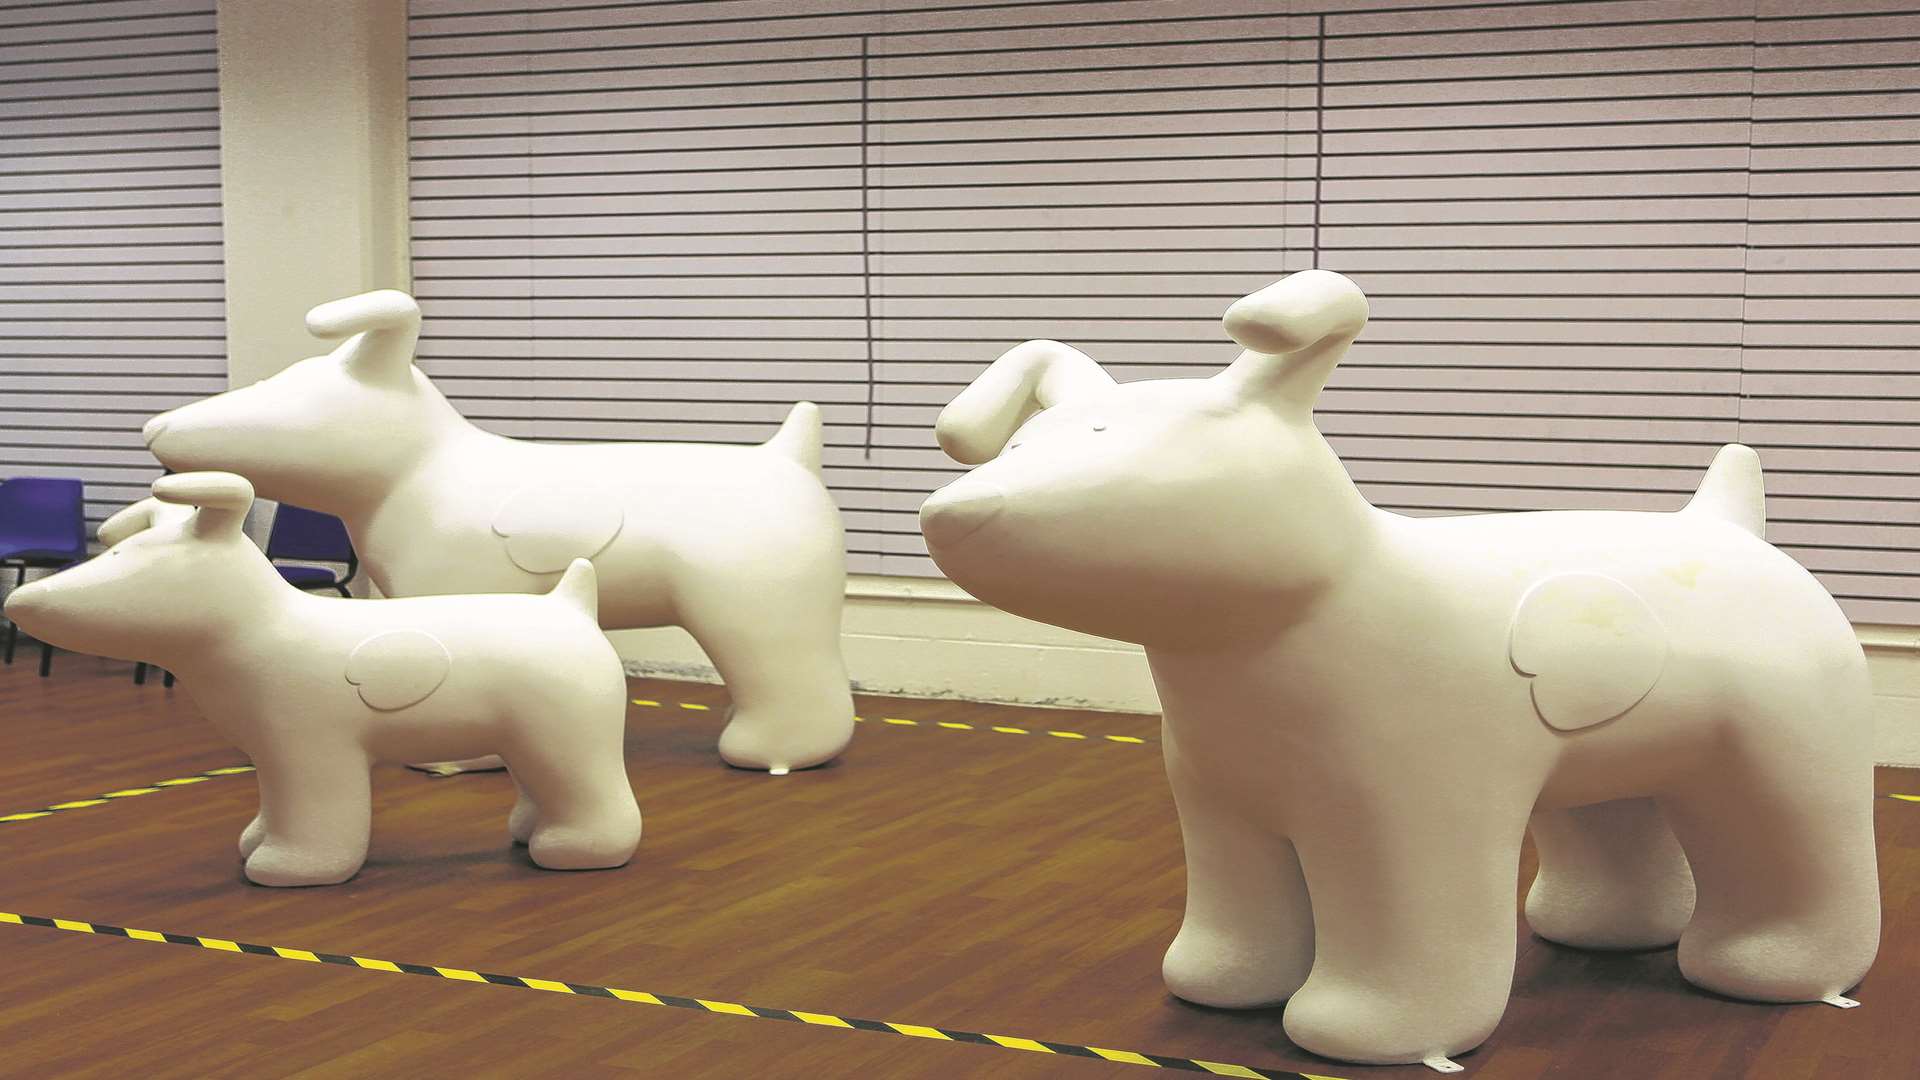 The snowdogs will be decorated by artists.